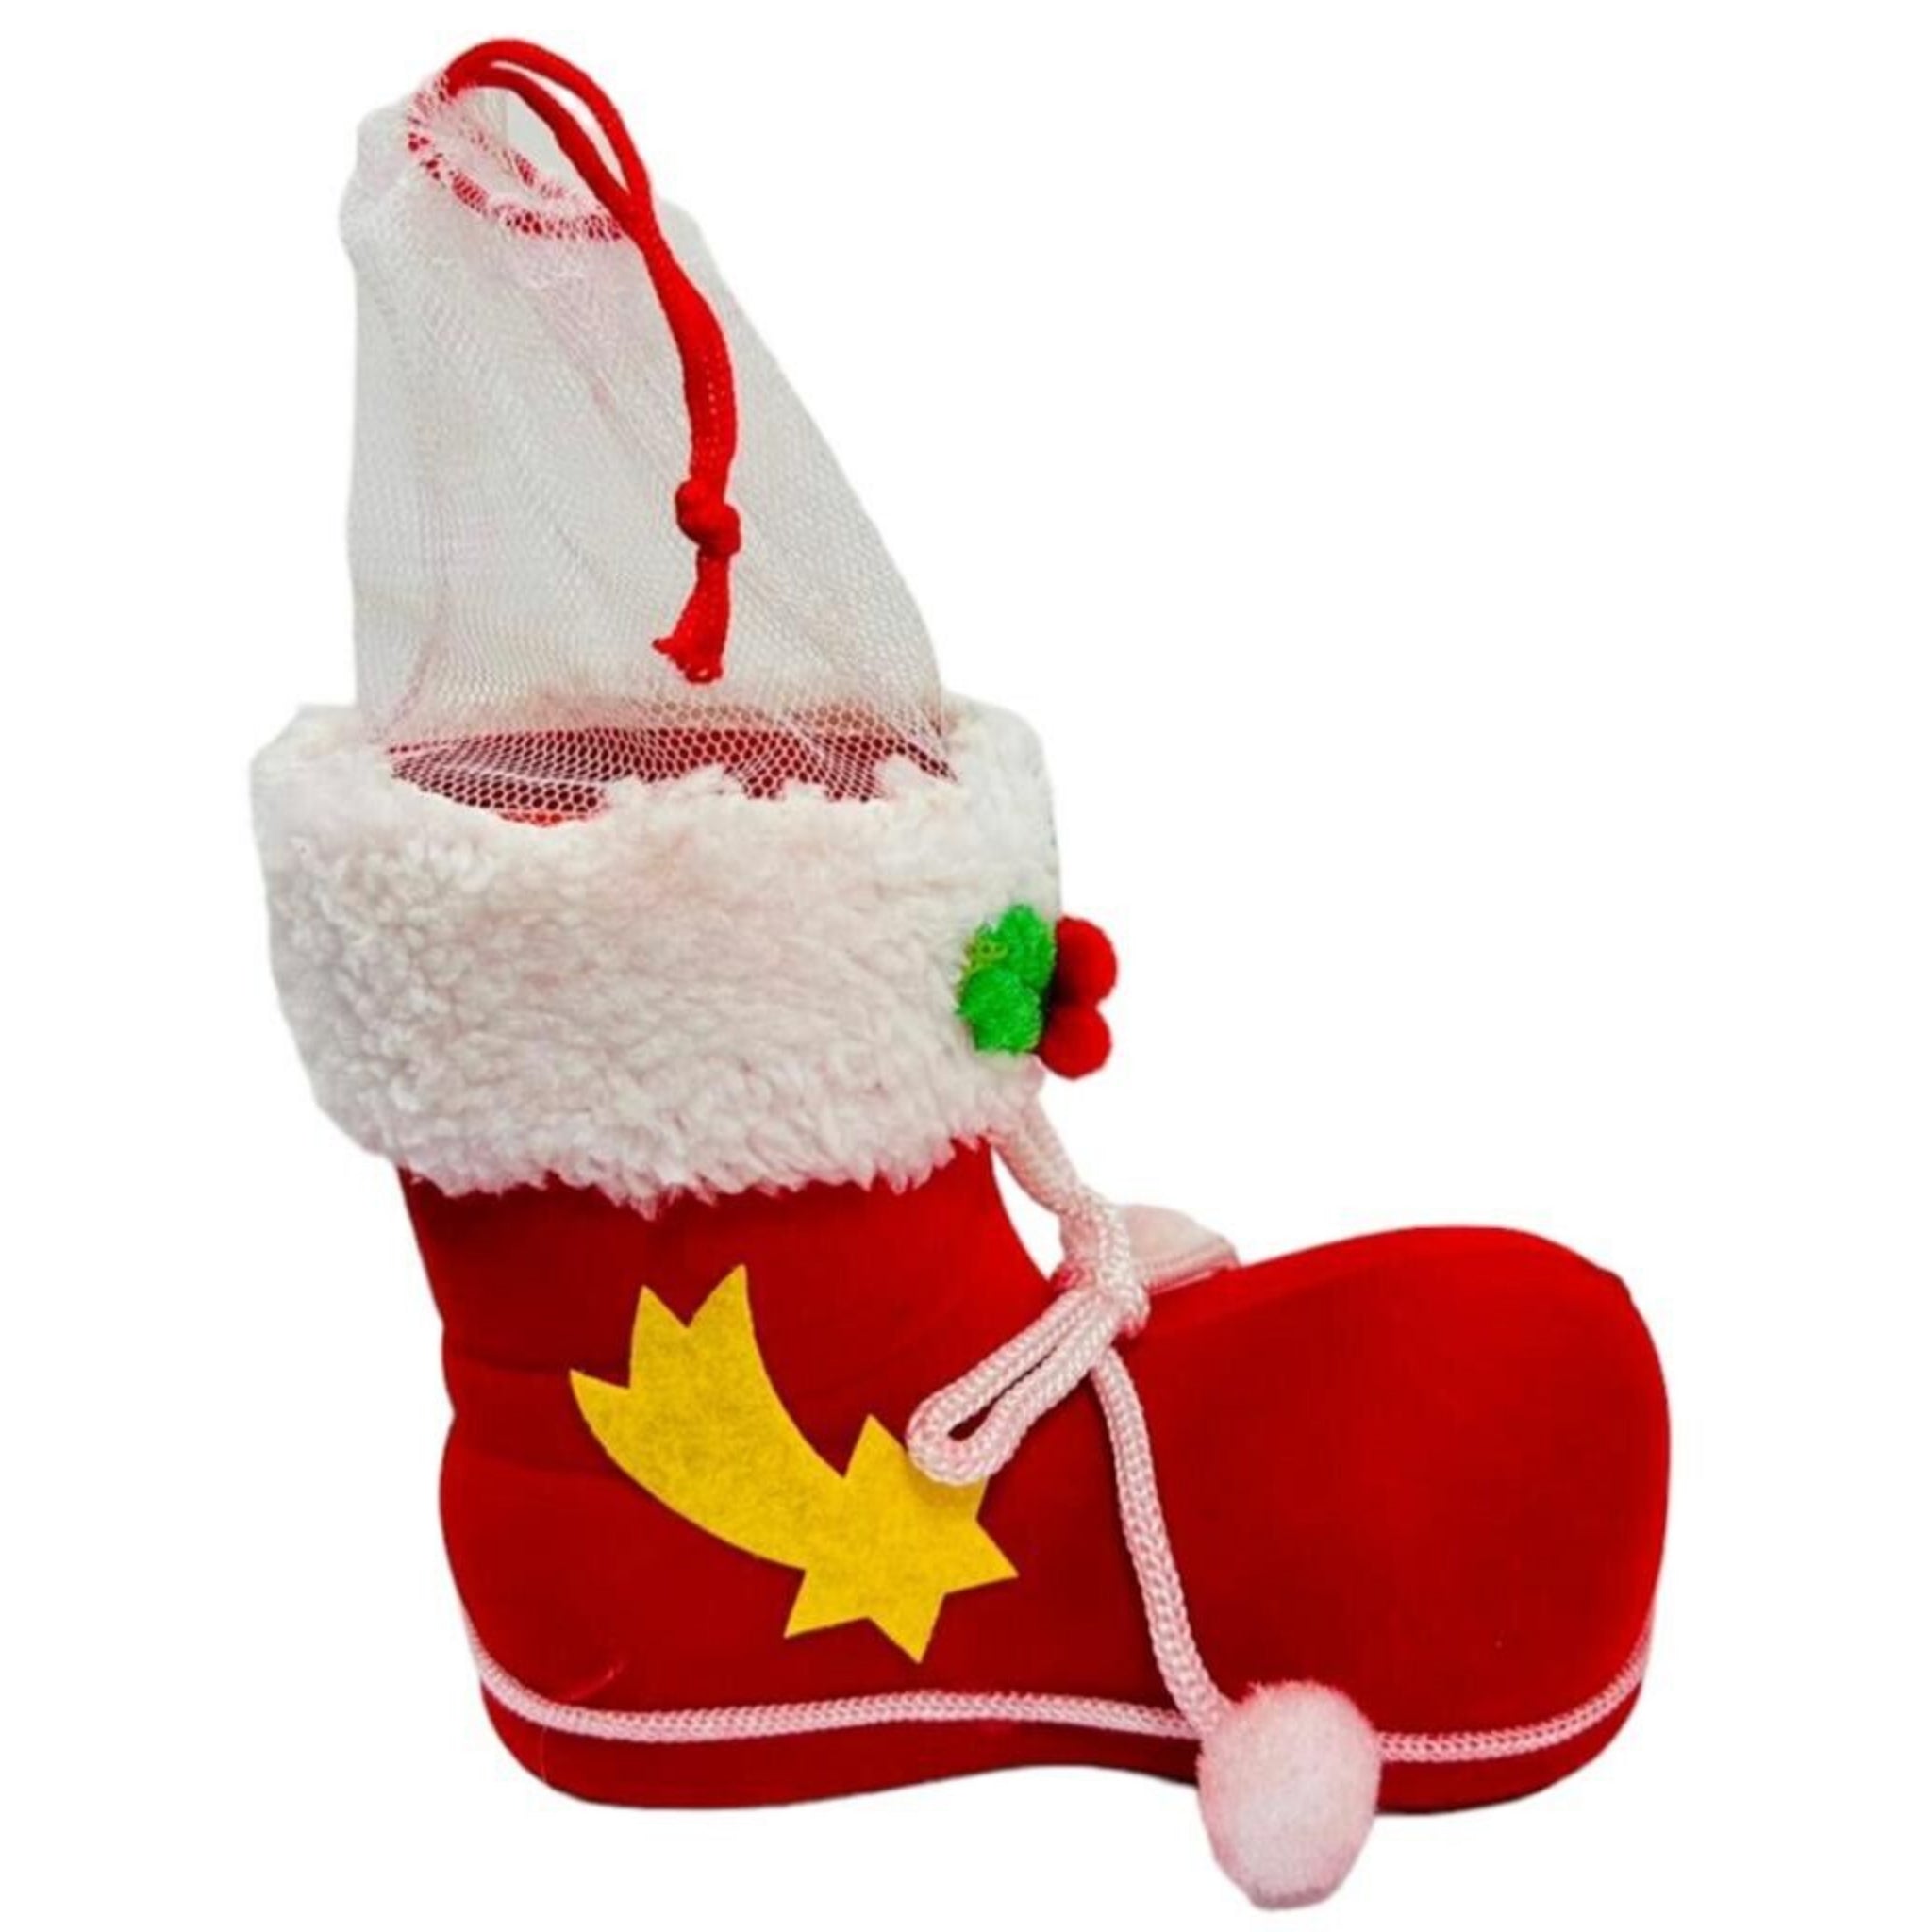 Beclen Harp 3Pc Christmas/Xmas Hanging Santa Claus Candy Boots/Shoes Present/Gift Basket-Perfect Christmas/Xmas Decoration Ornament And Door Decor